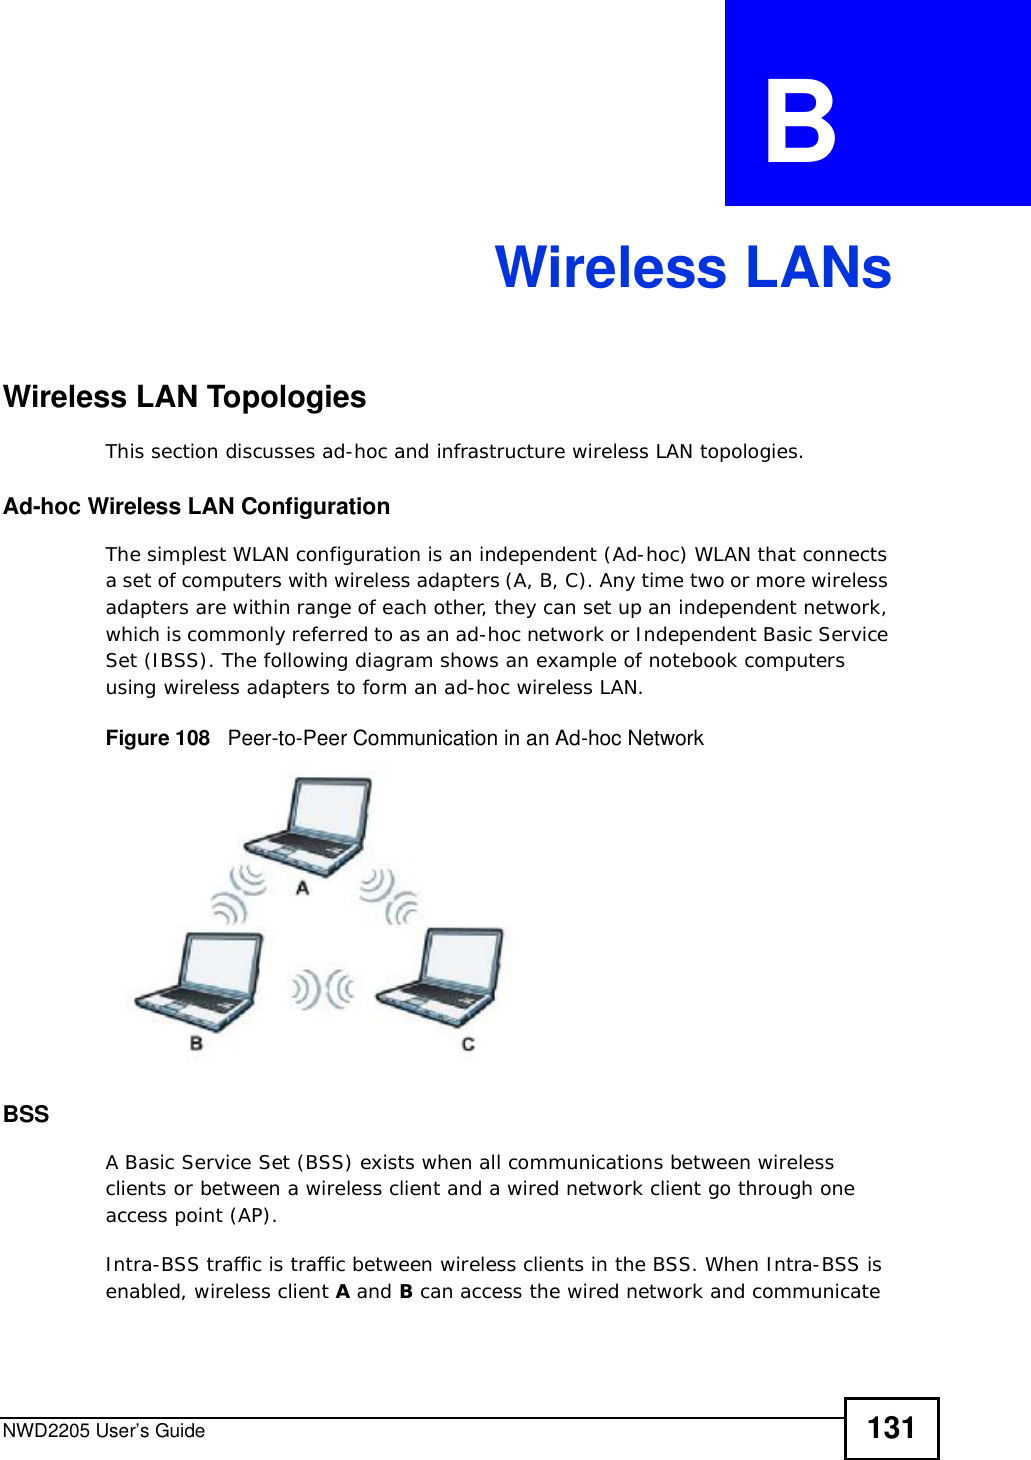 NWD2205 User’s Guide 131APPENDIX  B Wireless LANsWireless LAN TopologiesThis section discusses ad-hoc and infrastructure wireless LAN topologies.Ad-hoc Wireless LAN ConfigurationThe simplest WLAN configuration is an independent (Ad-hoc) WLAN that connects a set of computers with wireless adapters (A, B, C). Any time two or more wireless adapters are within range of each other, they can set up an independent network, which is commonly referred to as an ad-hoc network or Independent Basic Service Set (IBSS). The following diagram shows an example of notebook computers using wireless adapters to form an ad-hoc wireless LAN. Figure 108   Peer-to-Peer Communication in an Ad-hoc NetworkBSSA Basic Service Set (BSS) exists when all communications between wireless clients or between a wireless client and a wired network client go through one access point (AP). Intra-BSS traffic is traffic between wireless clients in the BSS. When Intra-BSS is enabled, wireless client A and B can access the wired network and communicate 